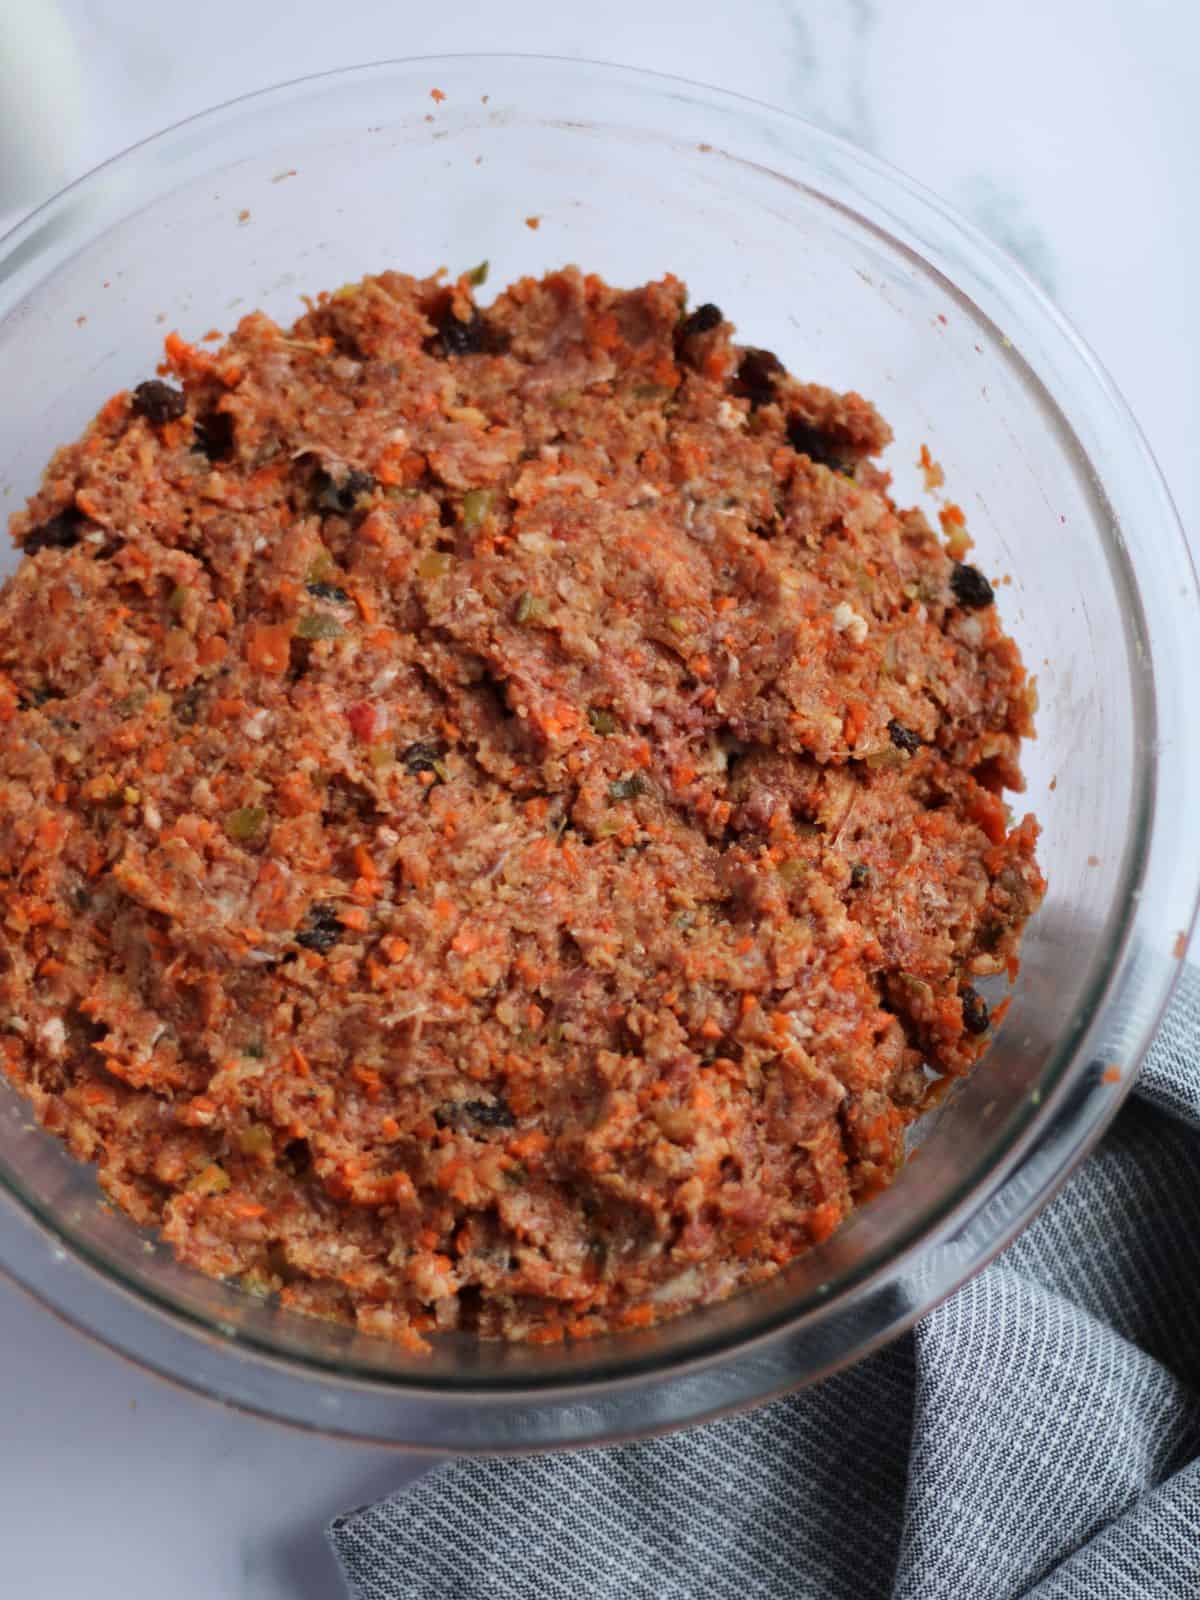 Ground meat mixture for embutido.